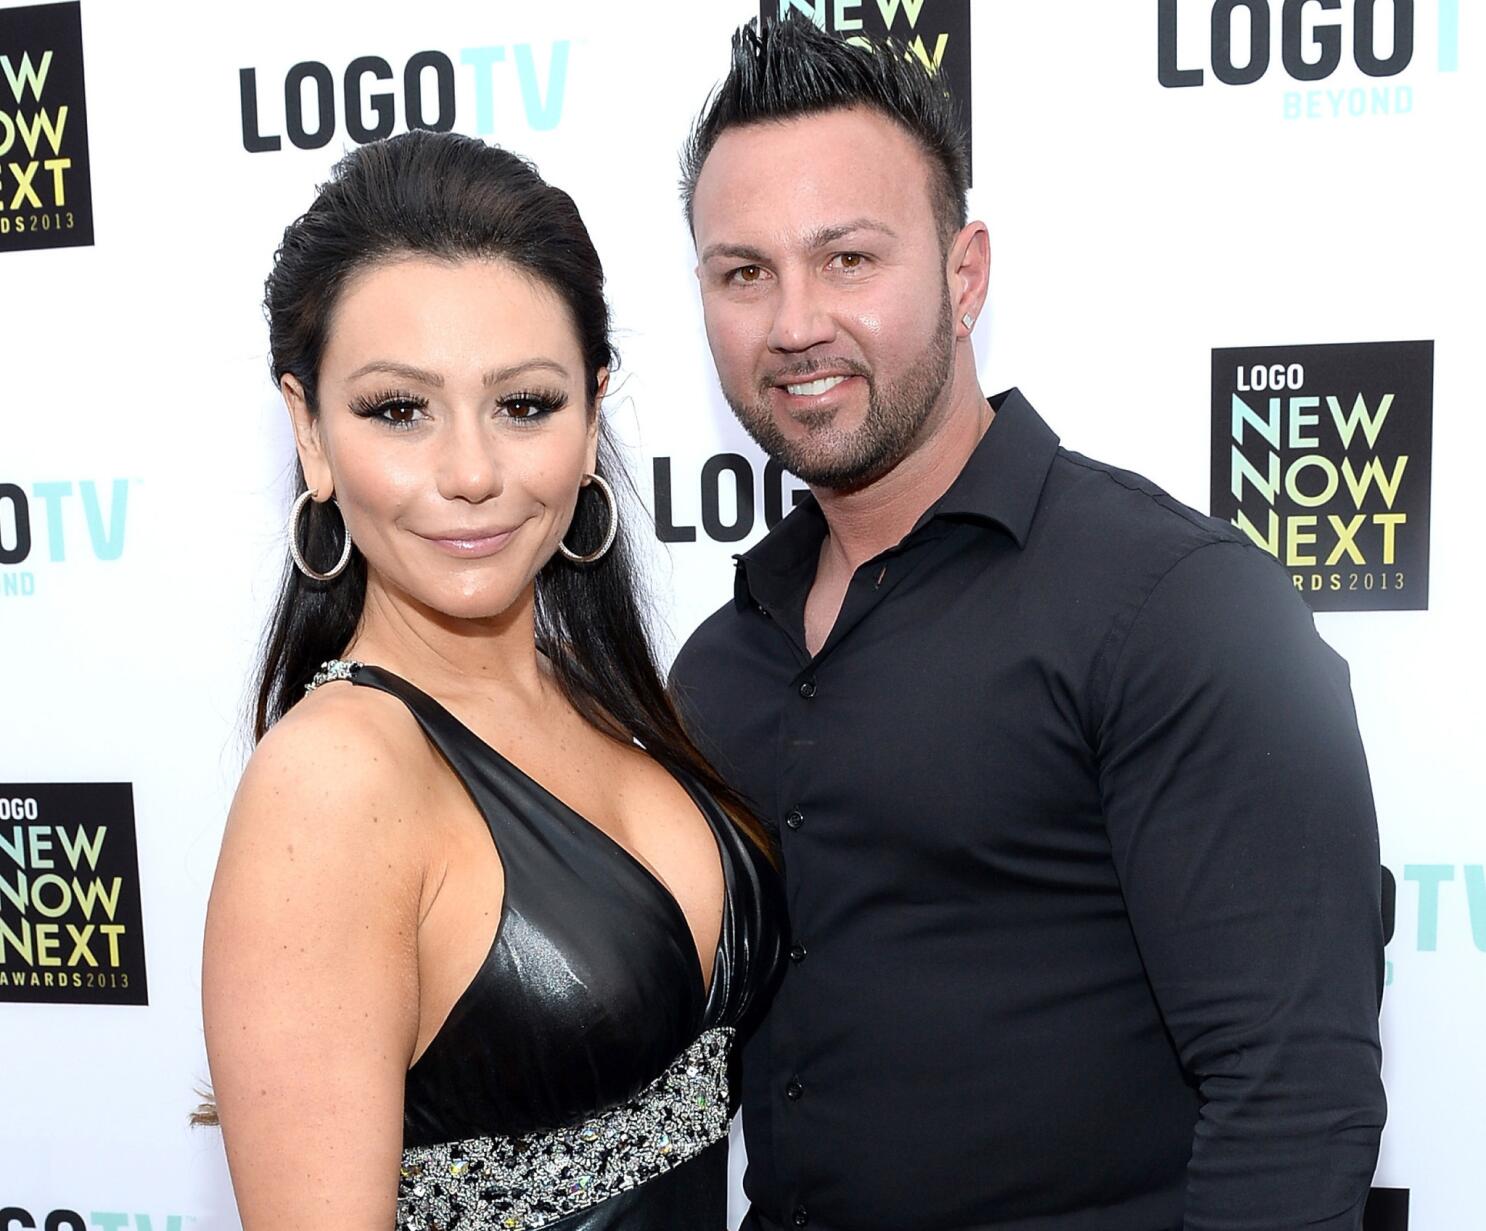 Jersey Shore': Jenni 'JWoww' Farley's Top 4 Iconic Moments